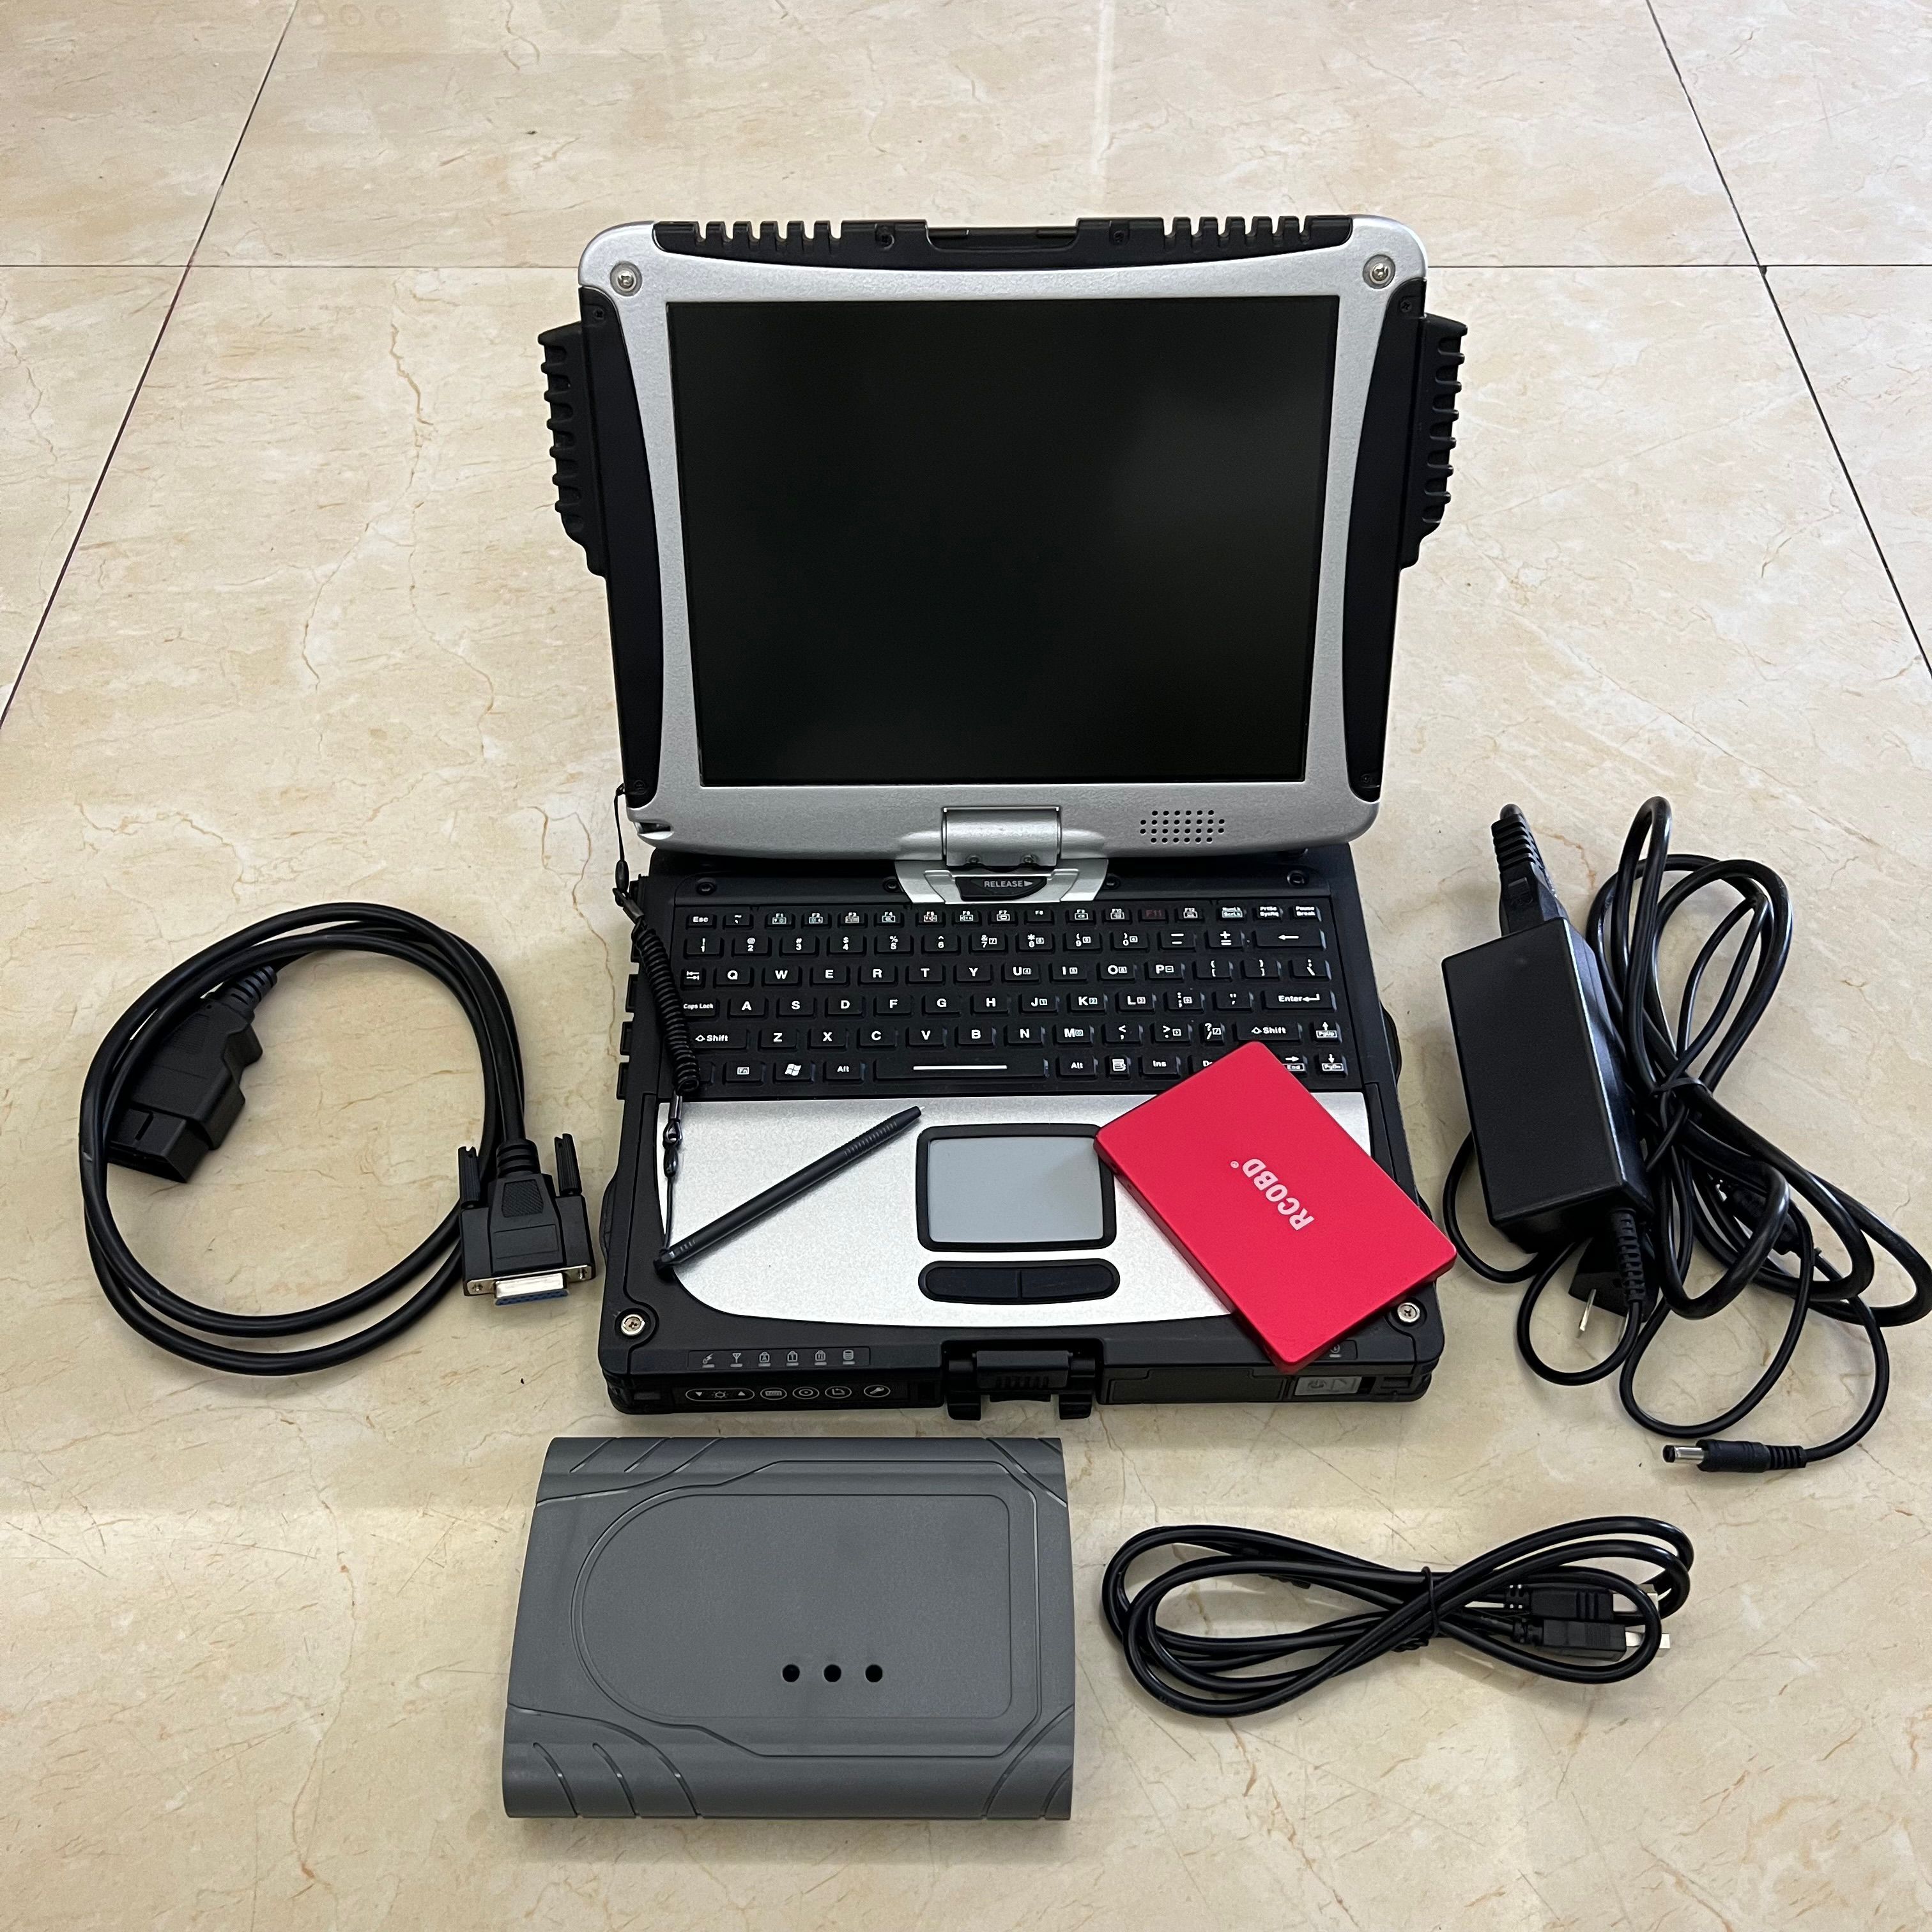 For Toyota Diagnostic Device Scanner Tool OTC IT3 Techstream V17 SOFTWARE Global GTS Laptop CF-19 I5 COMPUTER